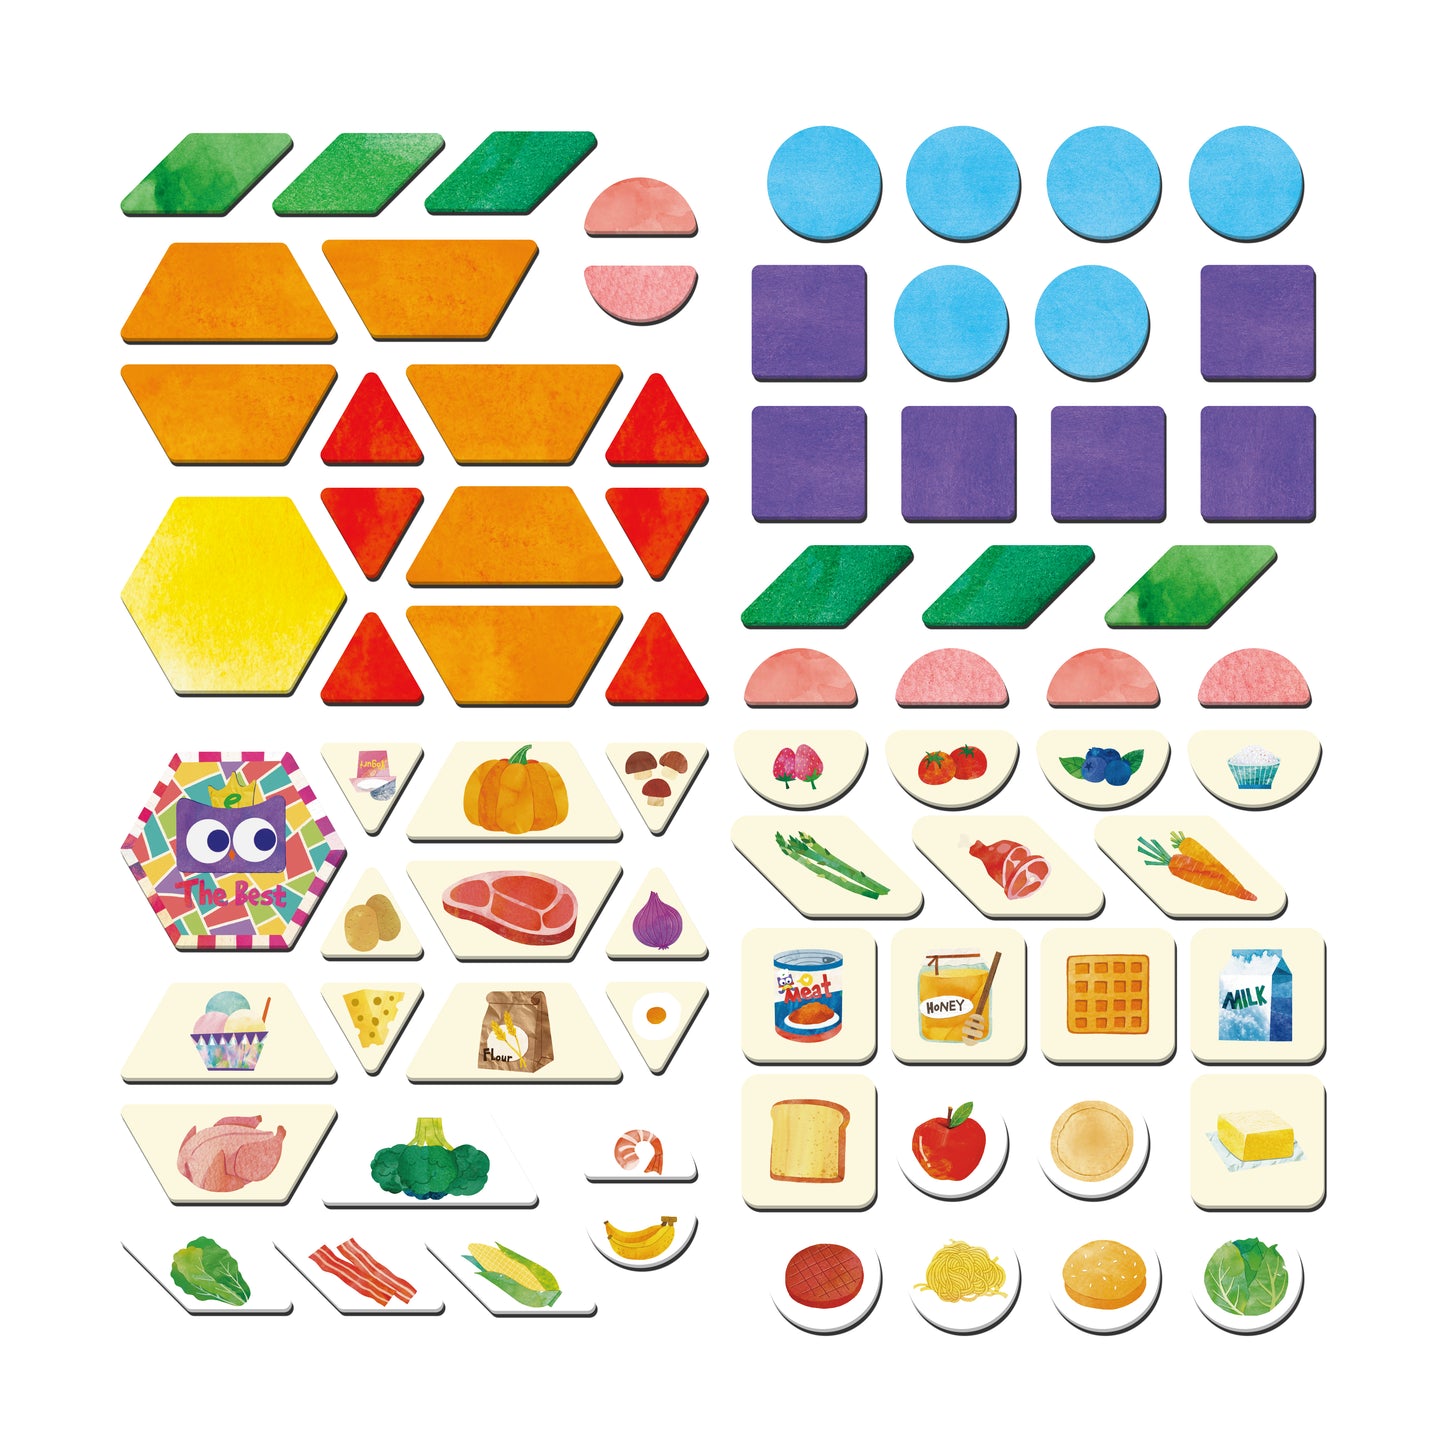 Magnetic Learning Game / Shapes